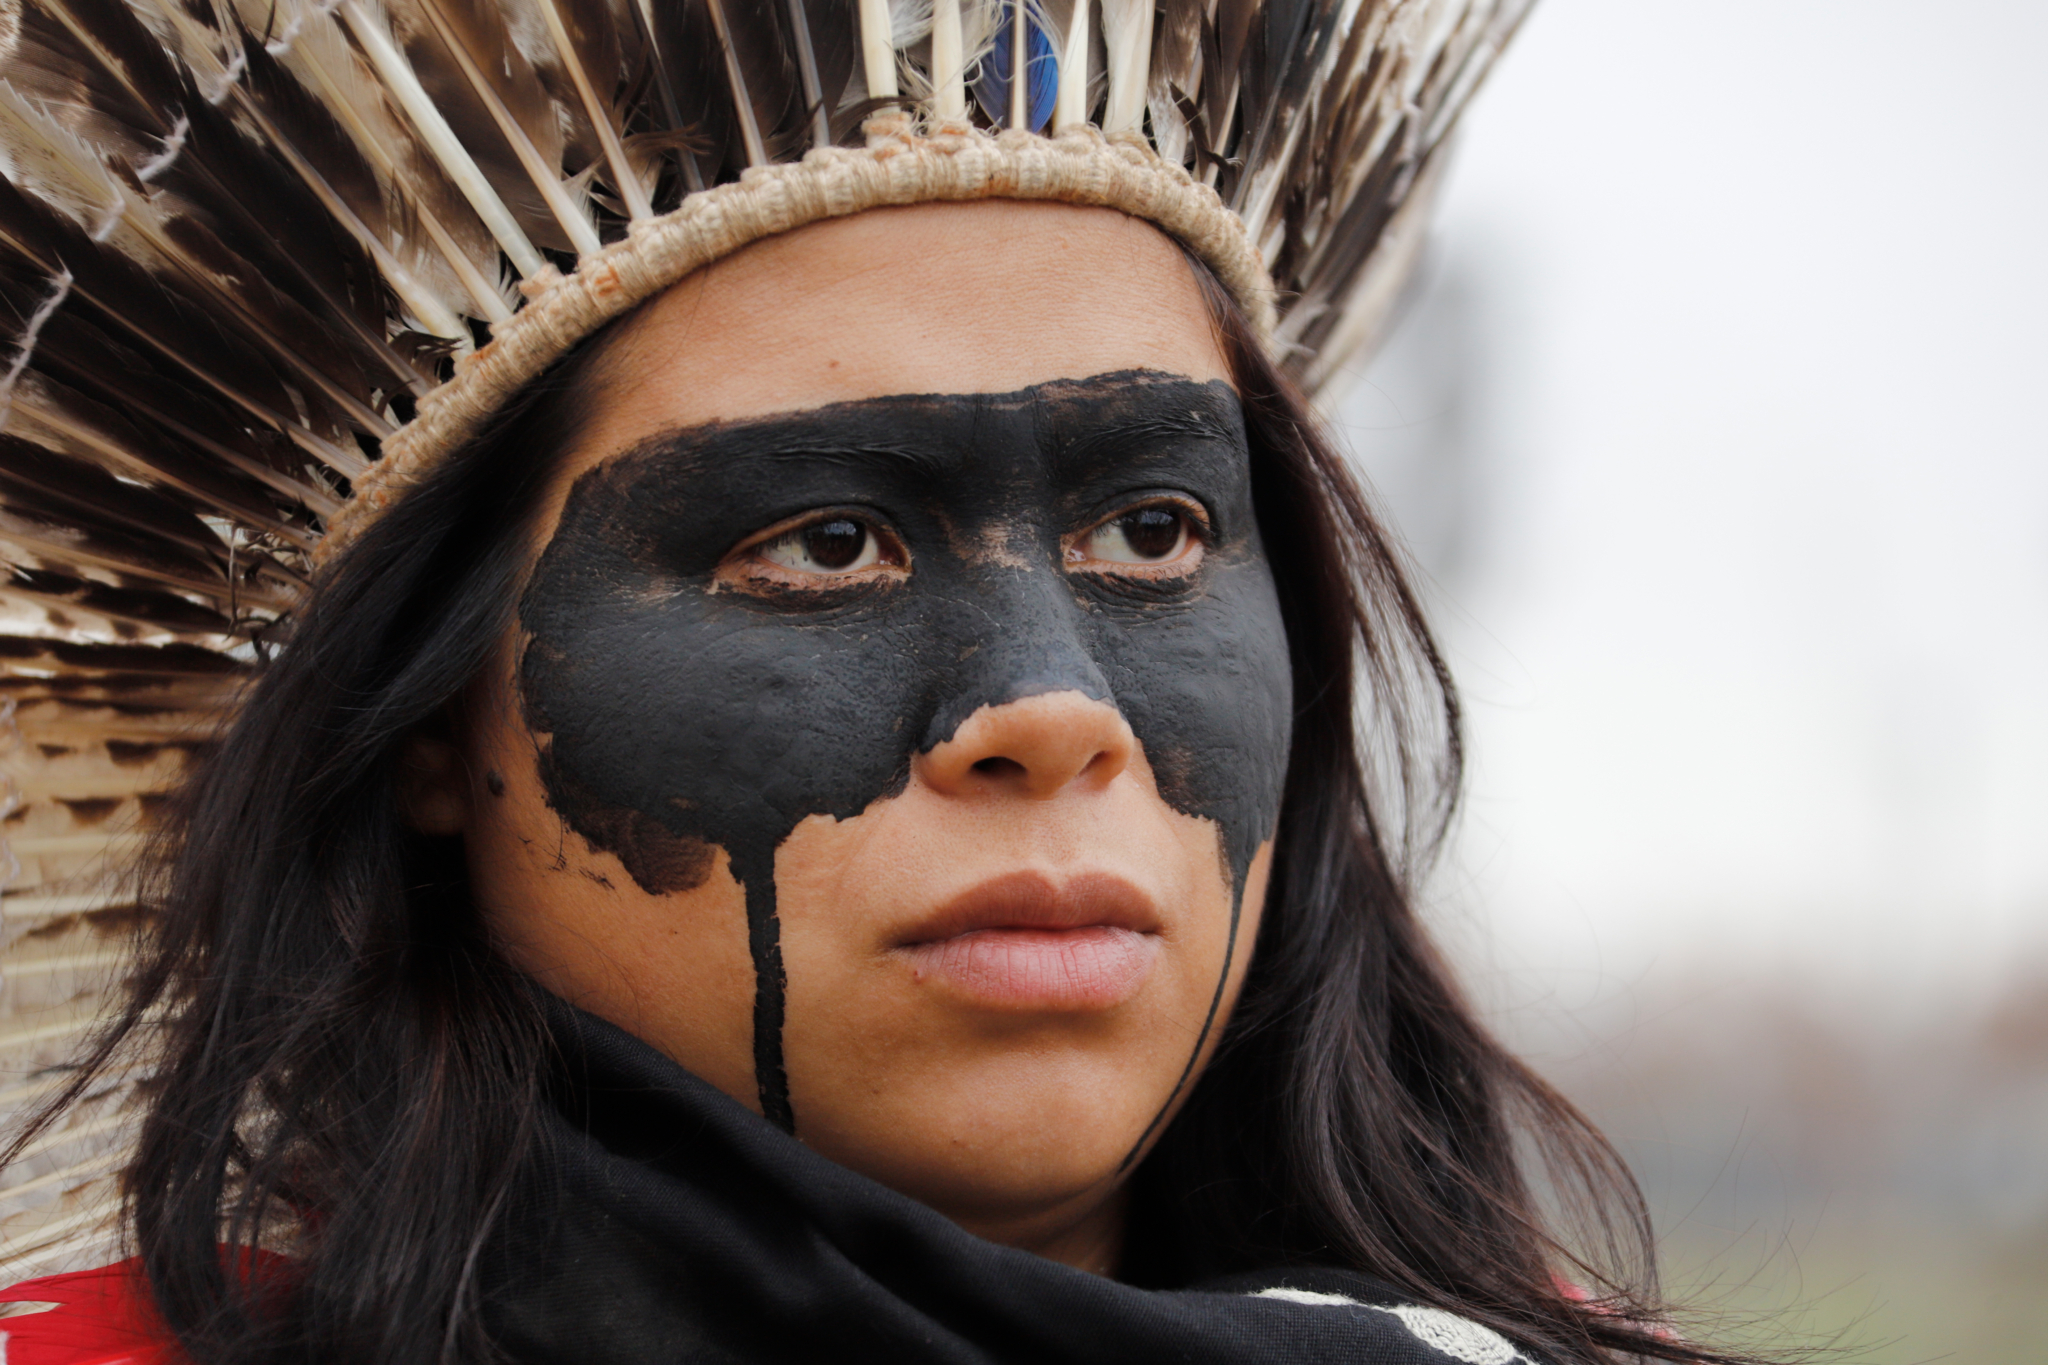 An indigenous protestor with her face painted black to symbolize oil contamination and the fossil fuel industry.
